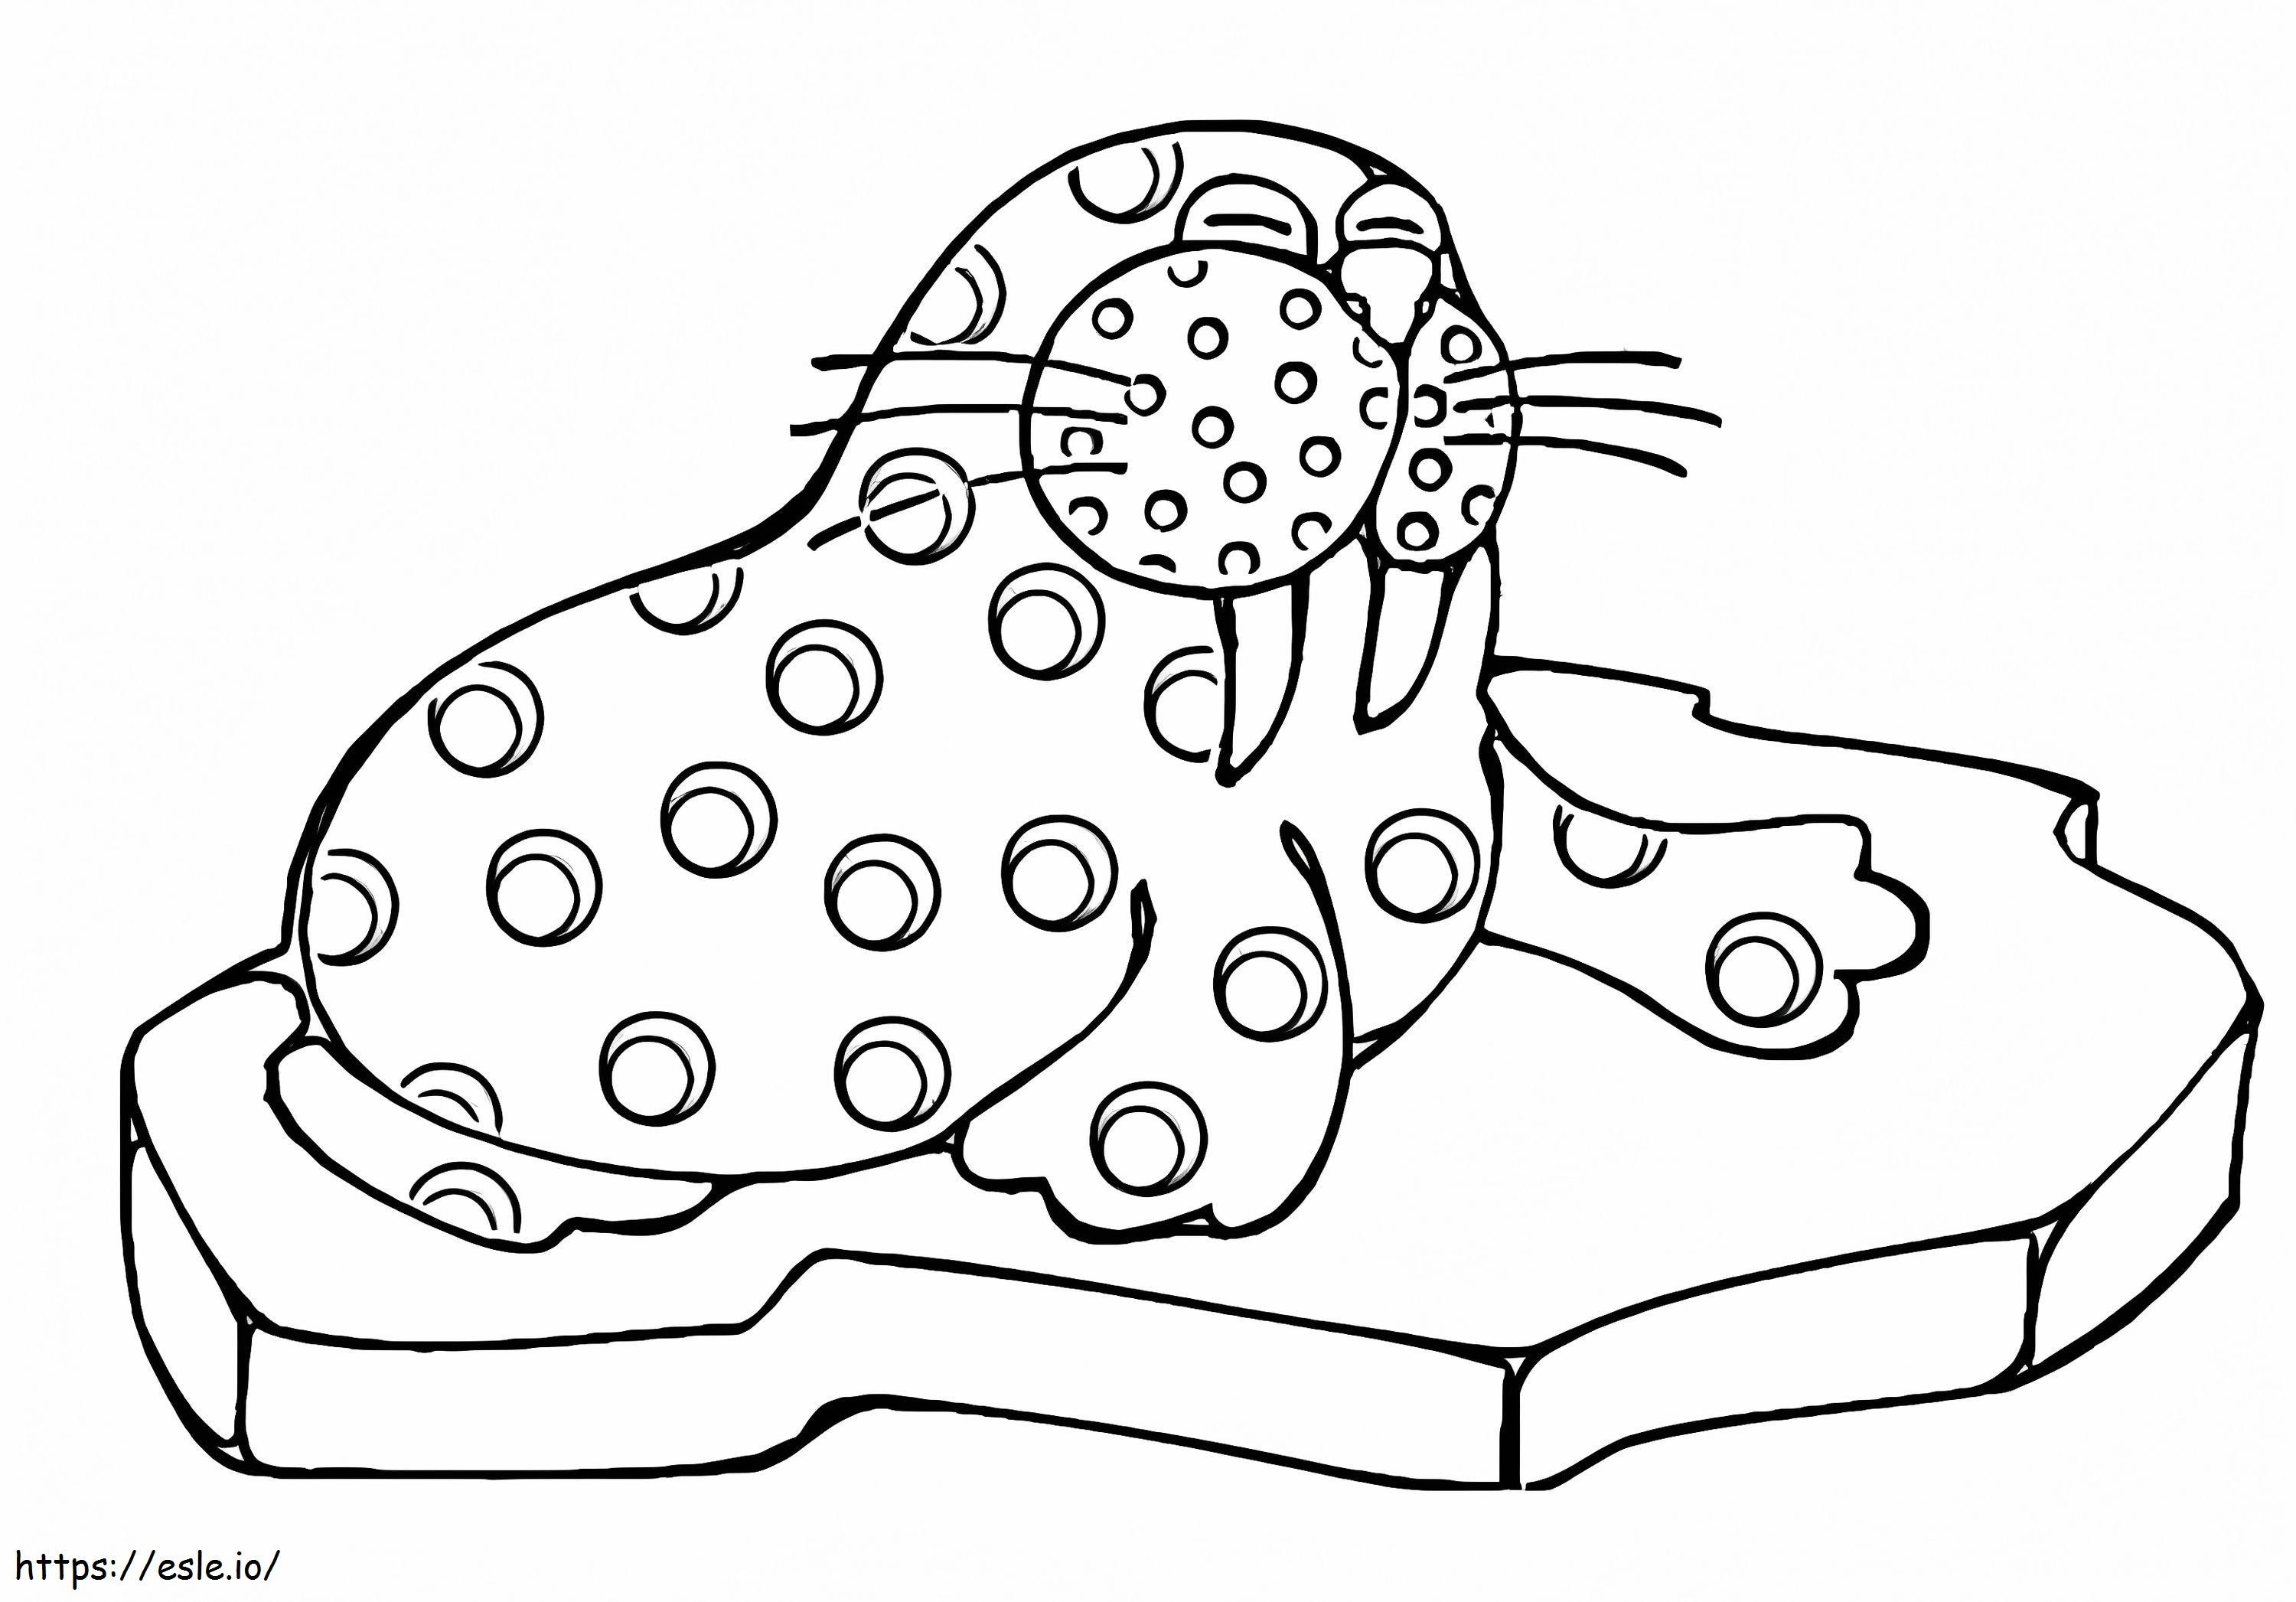 Blue Walrus coloring page